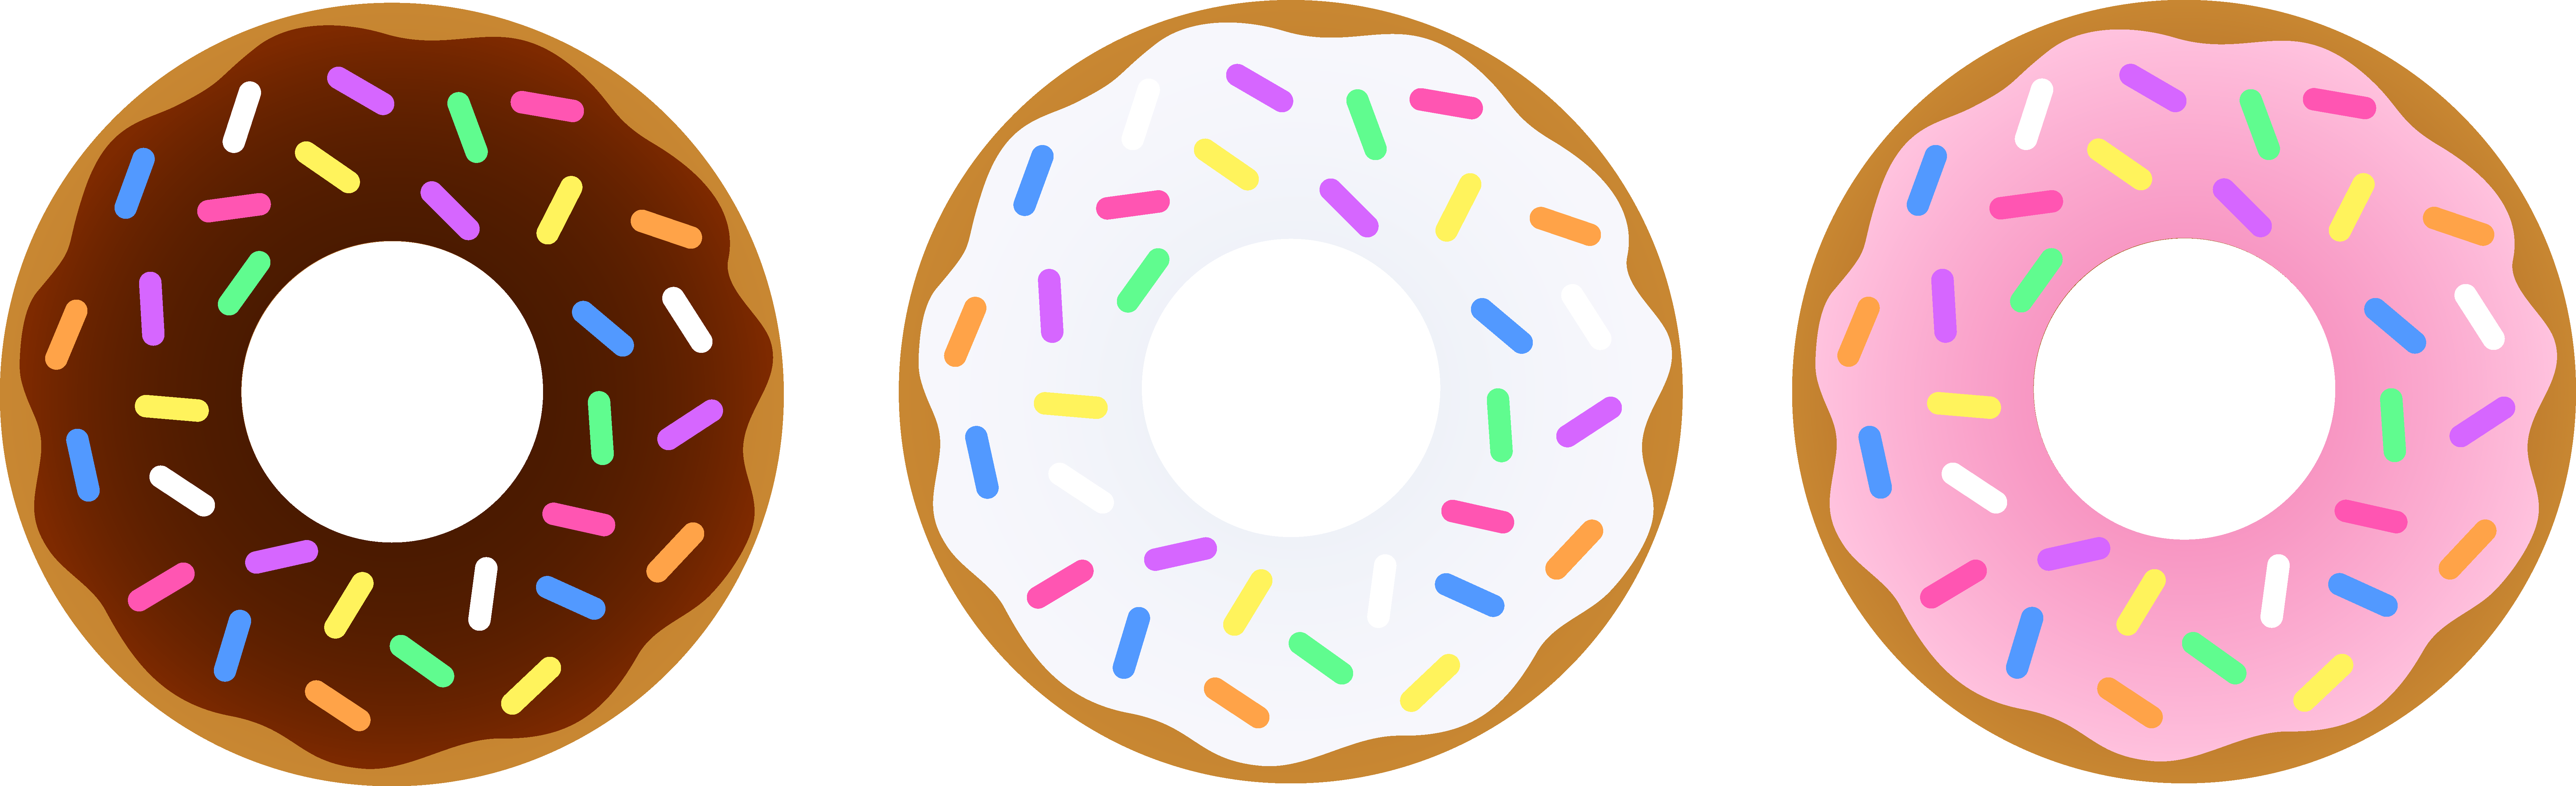 Clip art donut with sprinkles clipart